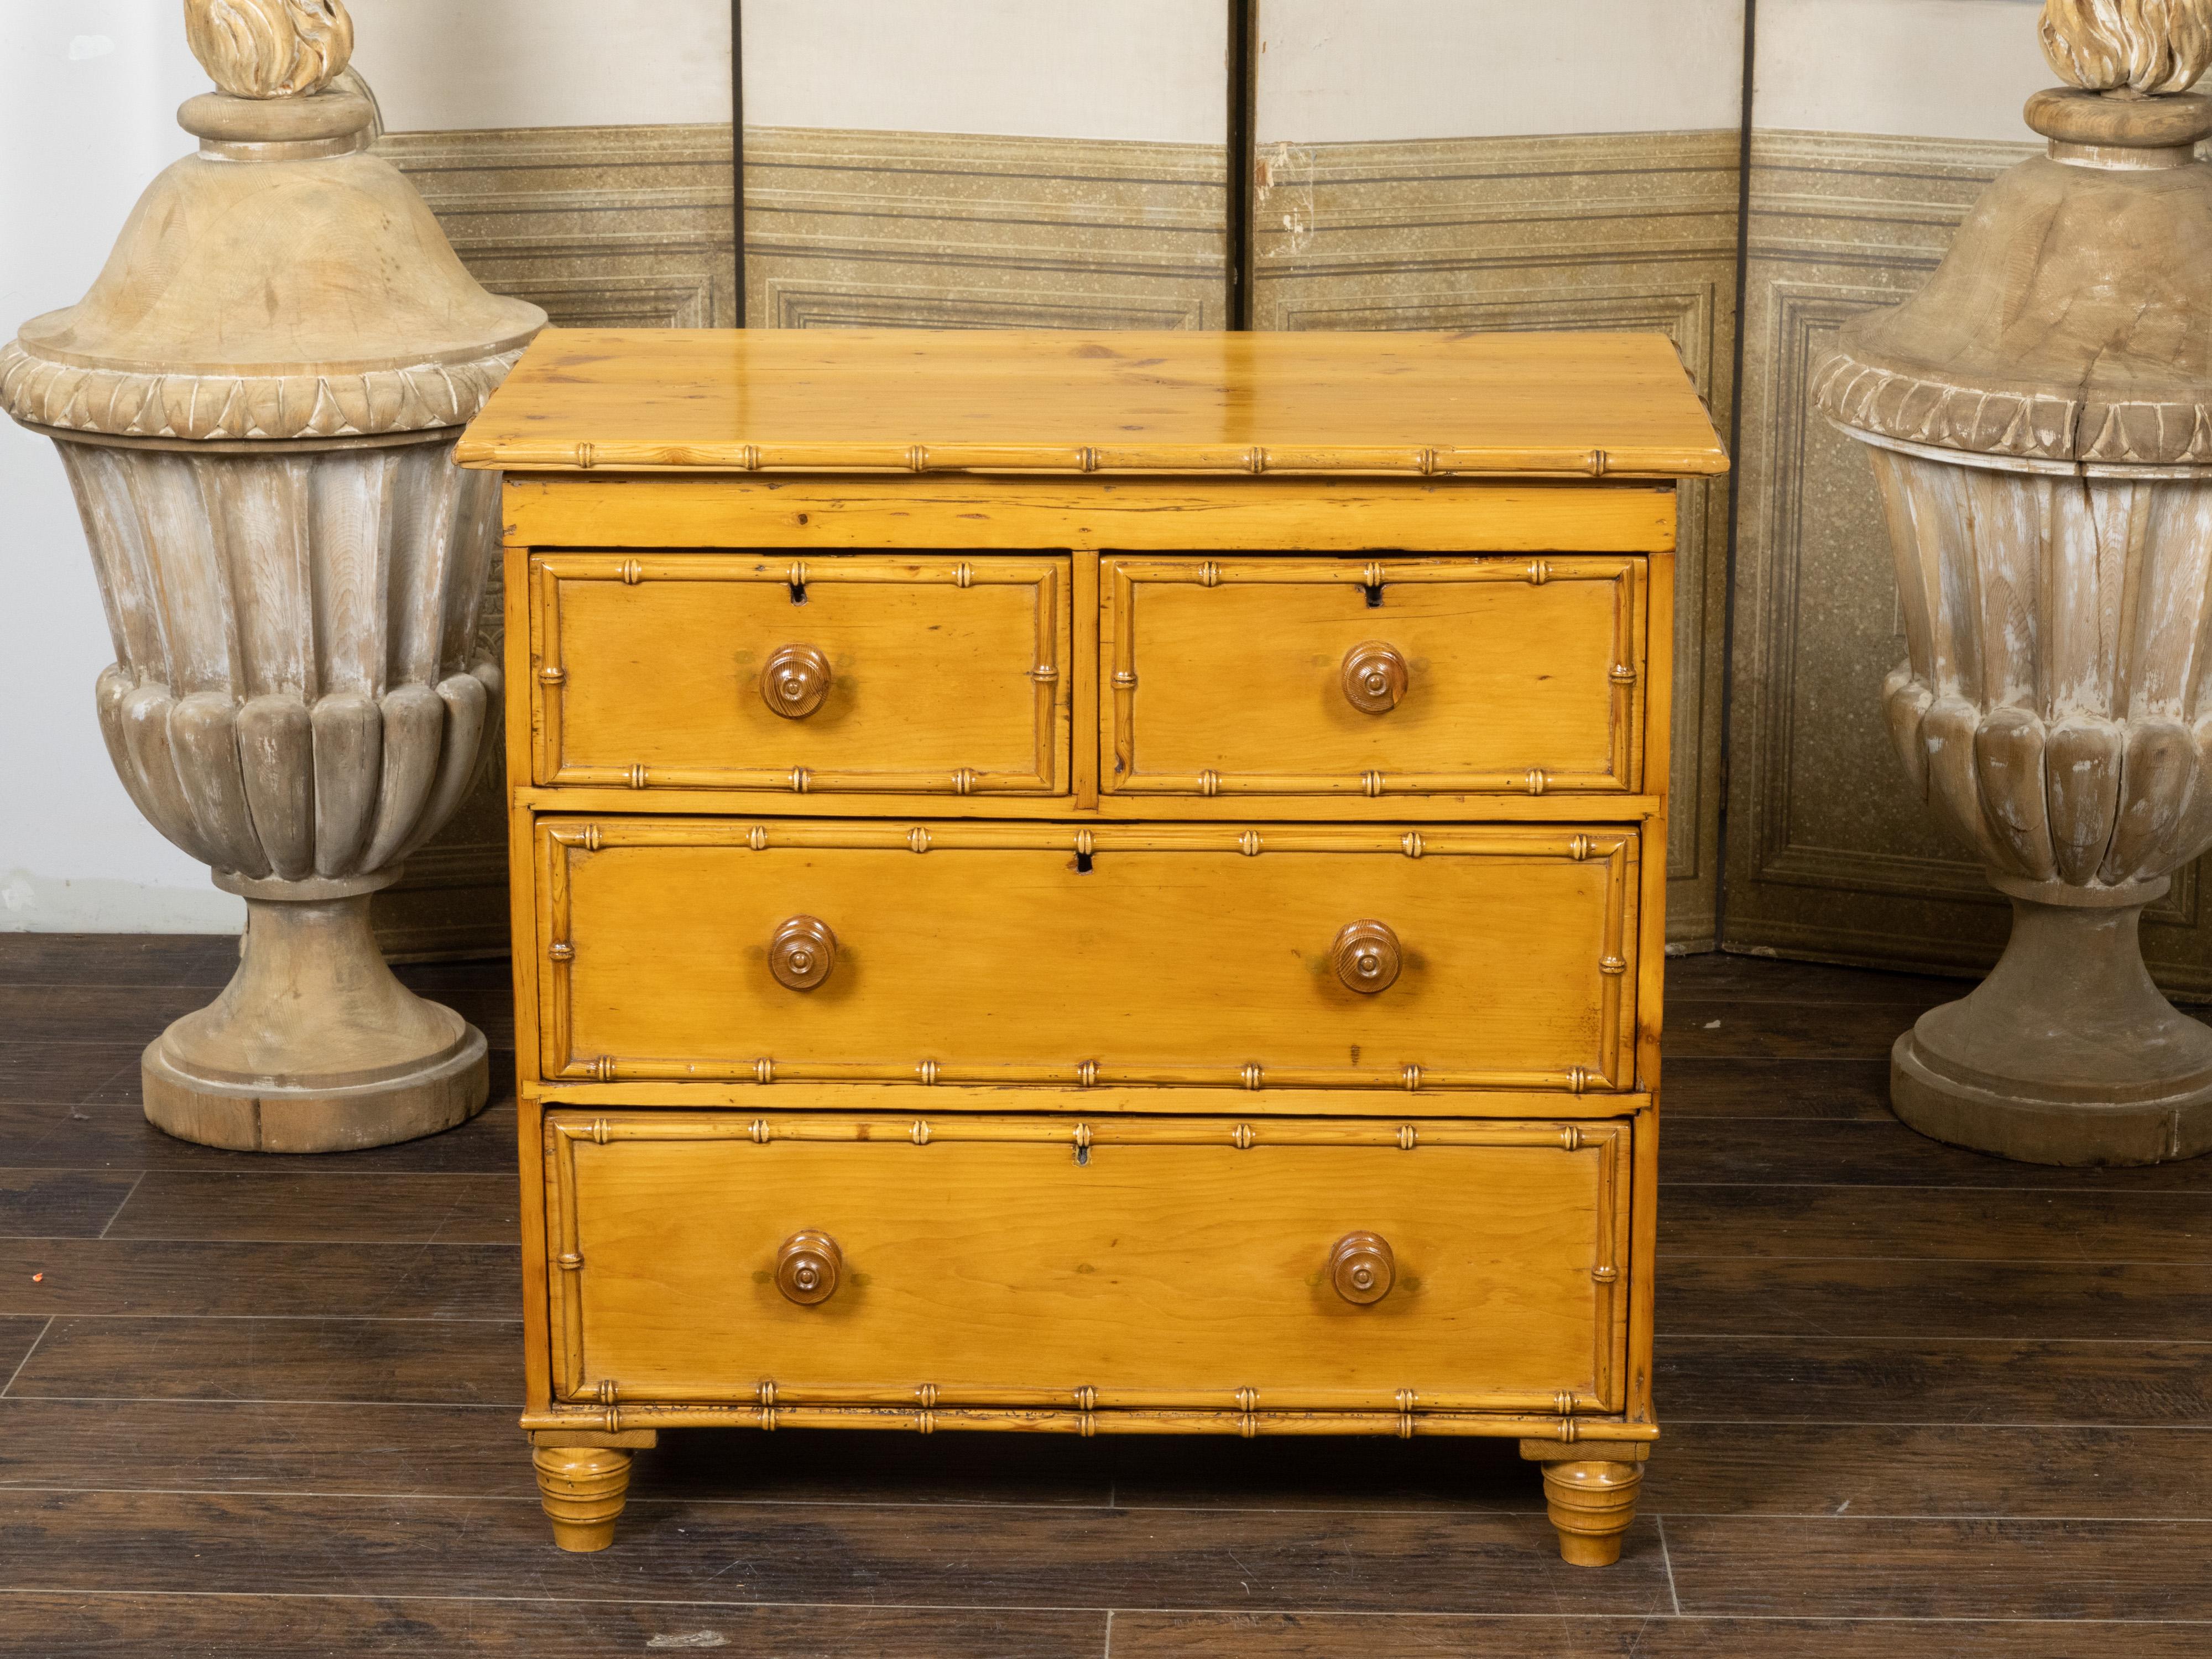 A rustic English pine chest from the 19th century, with faux bamboo accents, four drawers, turned feet and great character. Created in England during the 19th century, this pine chest features a rectangular top sitting above a perfectly organized